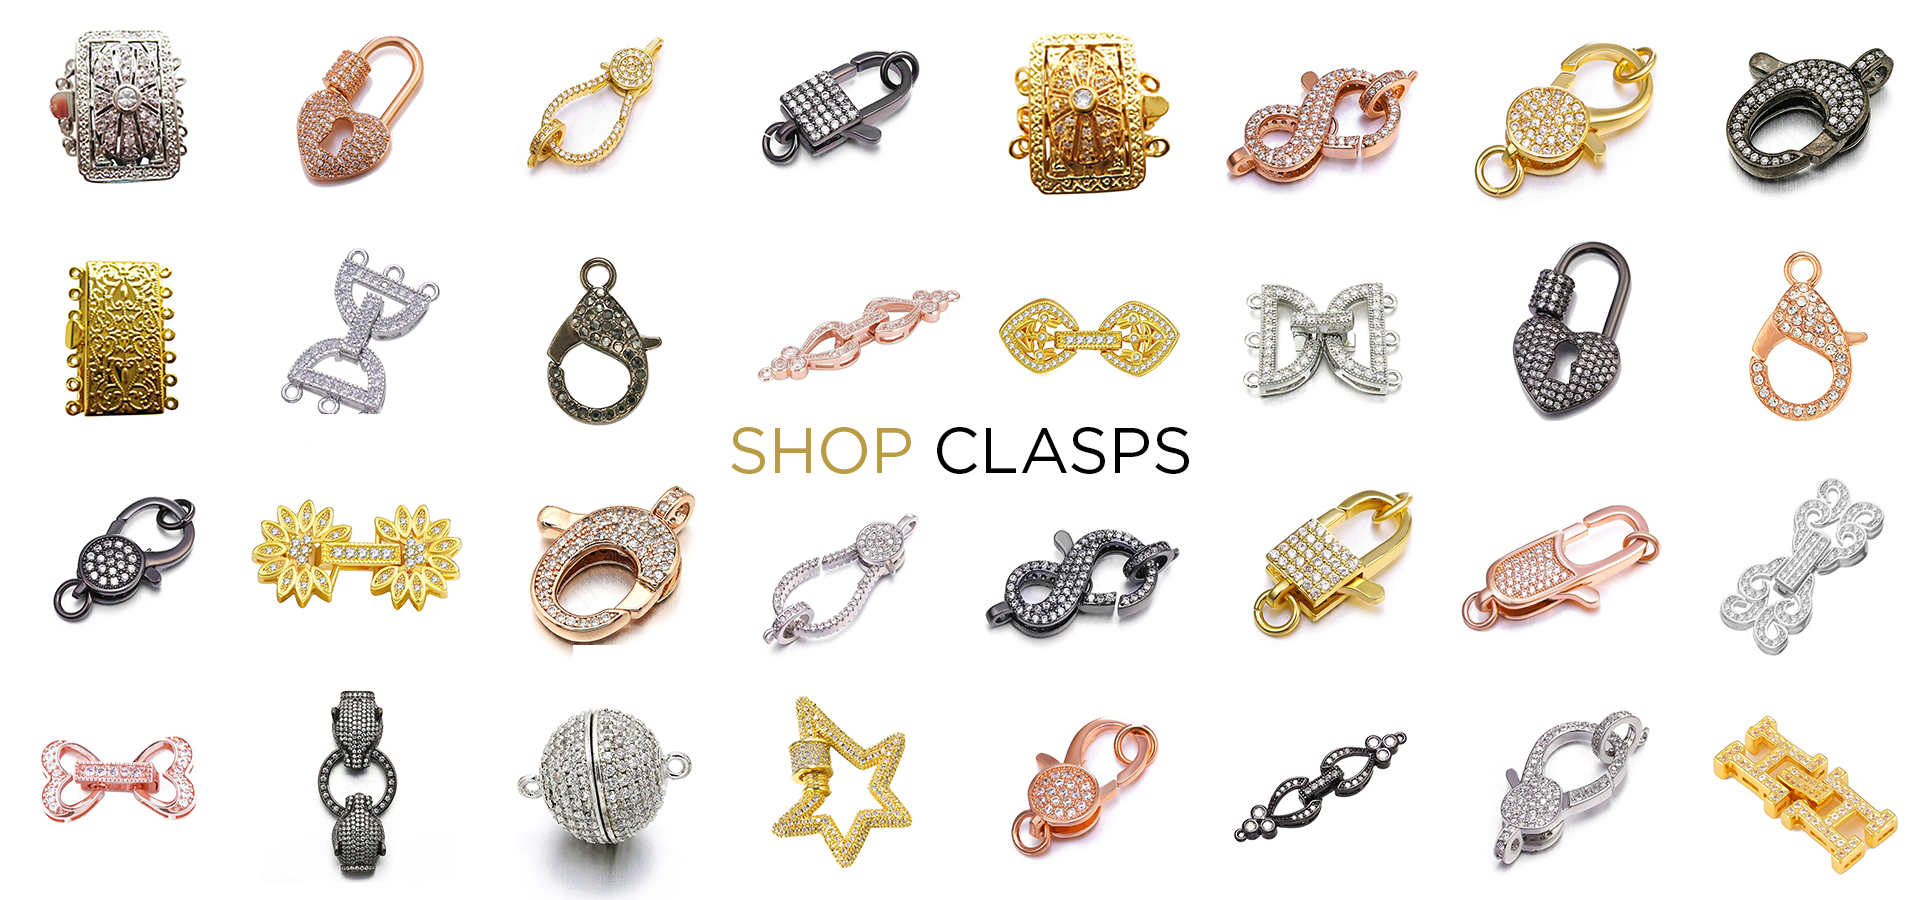 Clasps, Box Claps, Lobster Clasps, Gold Clasps